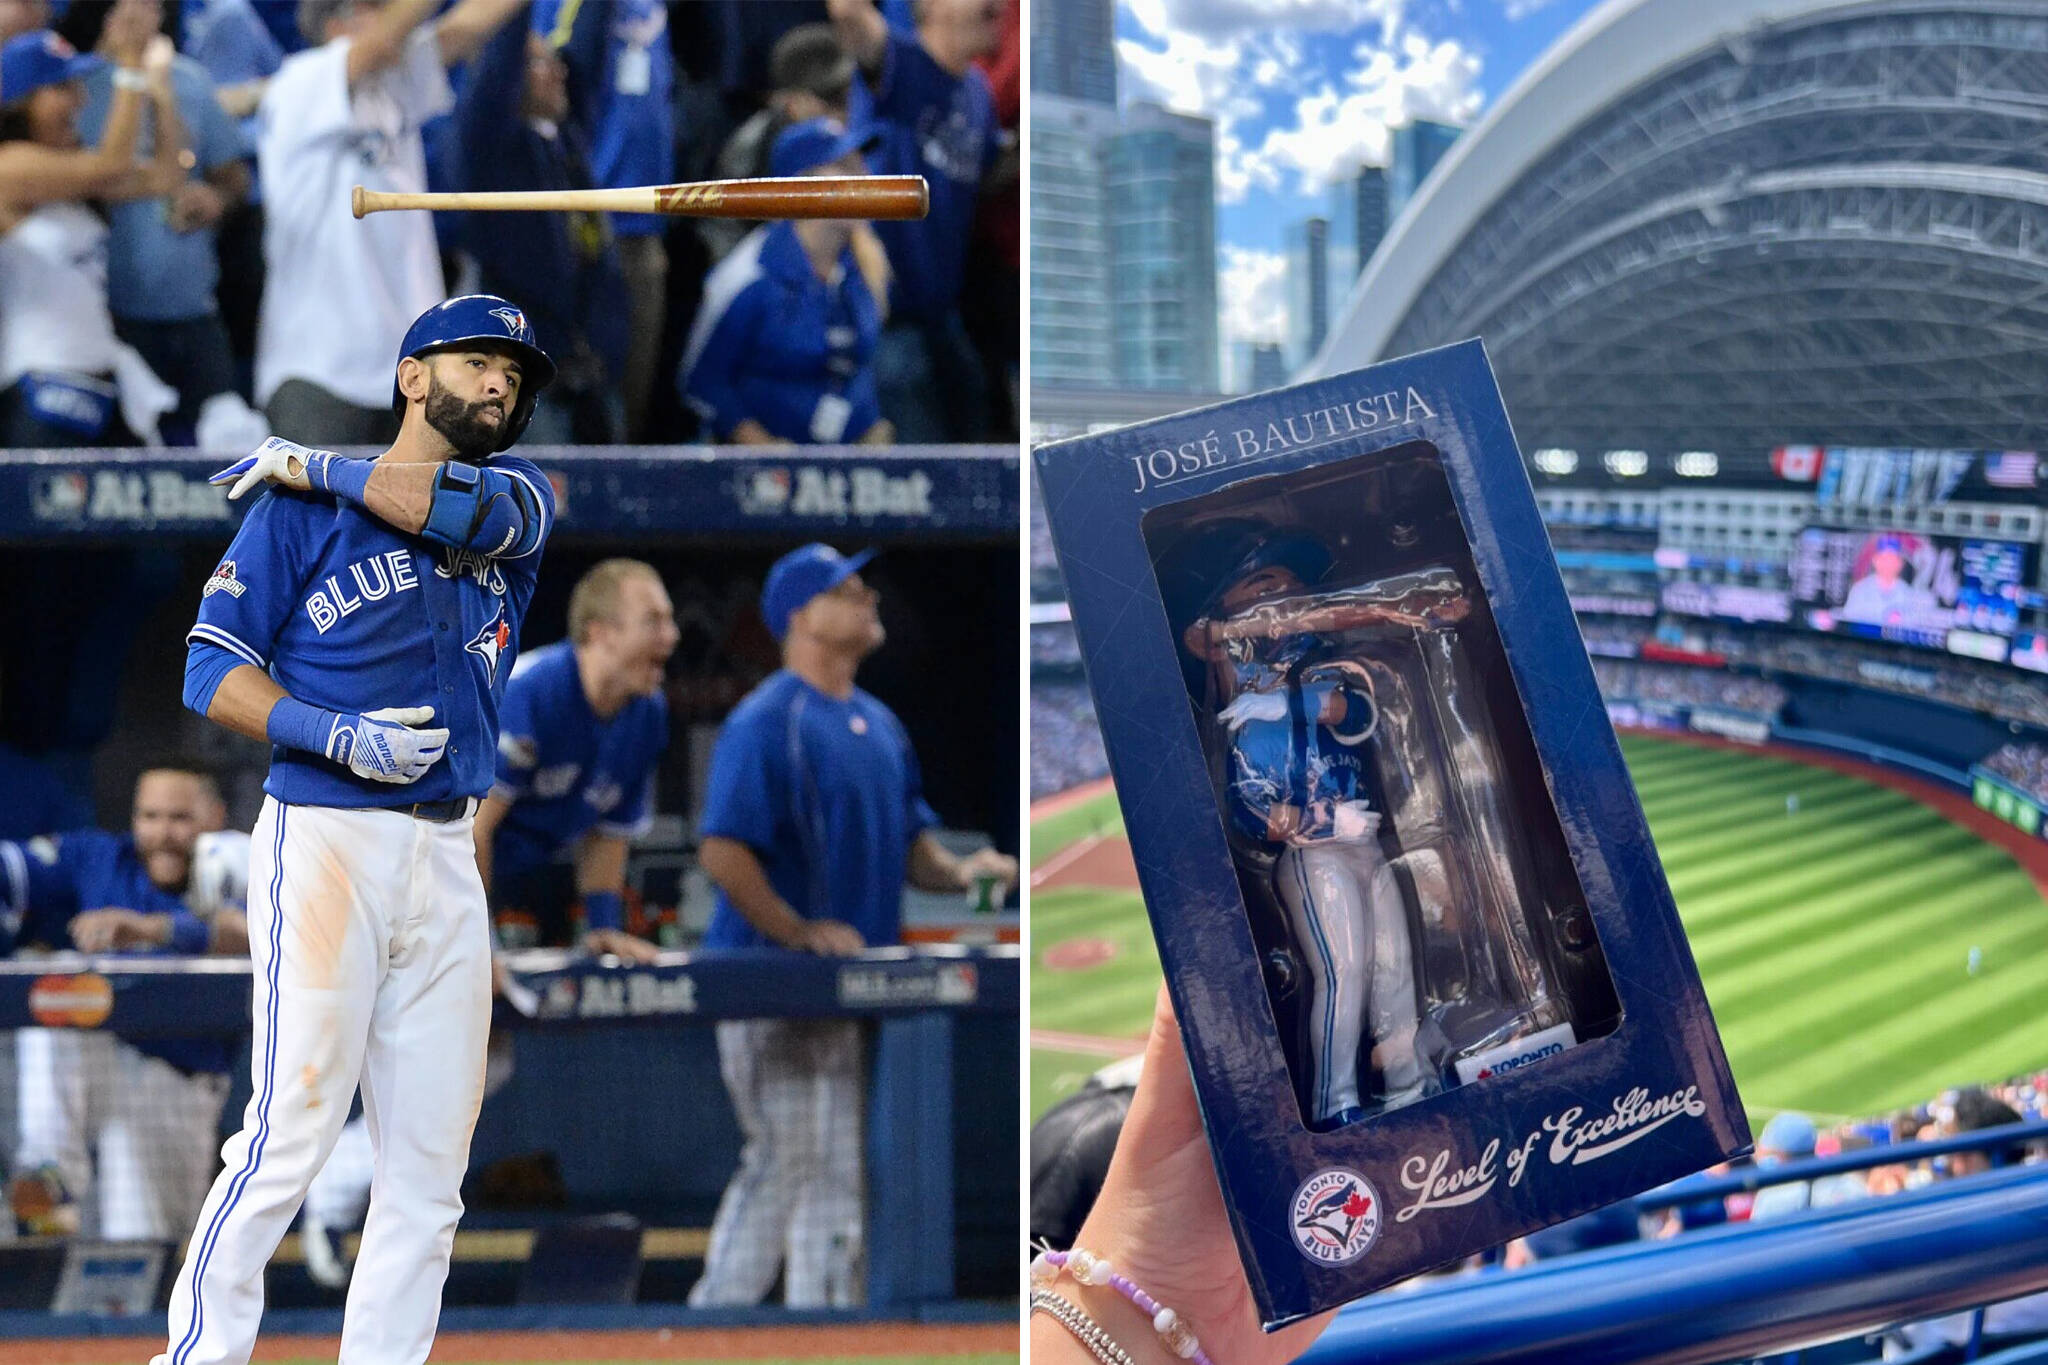 All the Blue Jays fan giveaways available at Rogers Centre this year